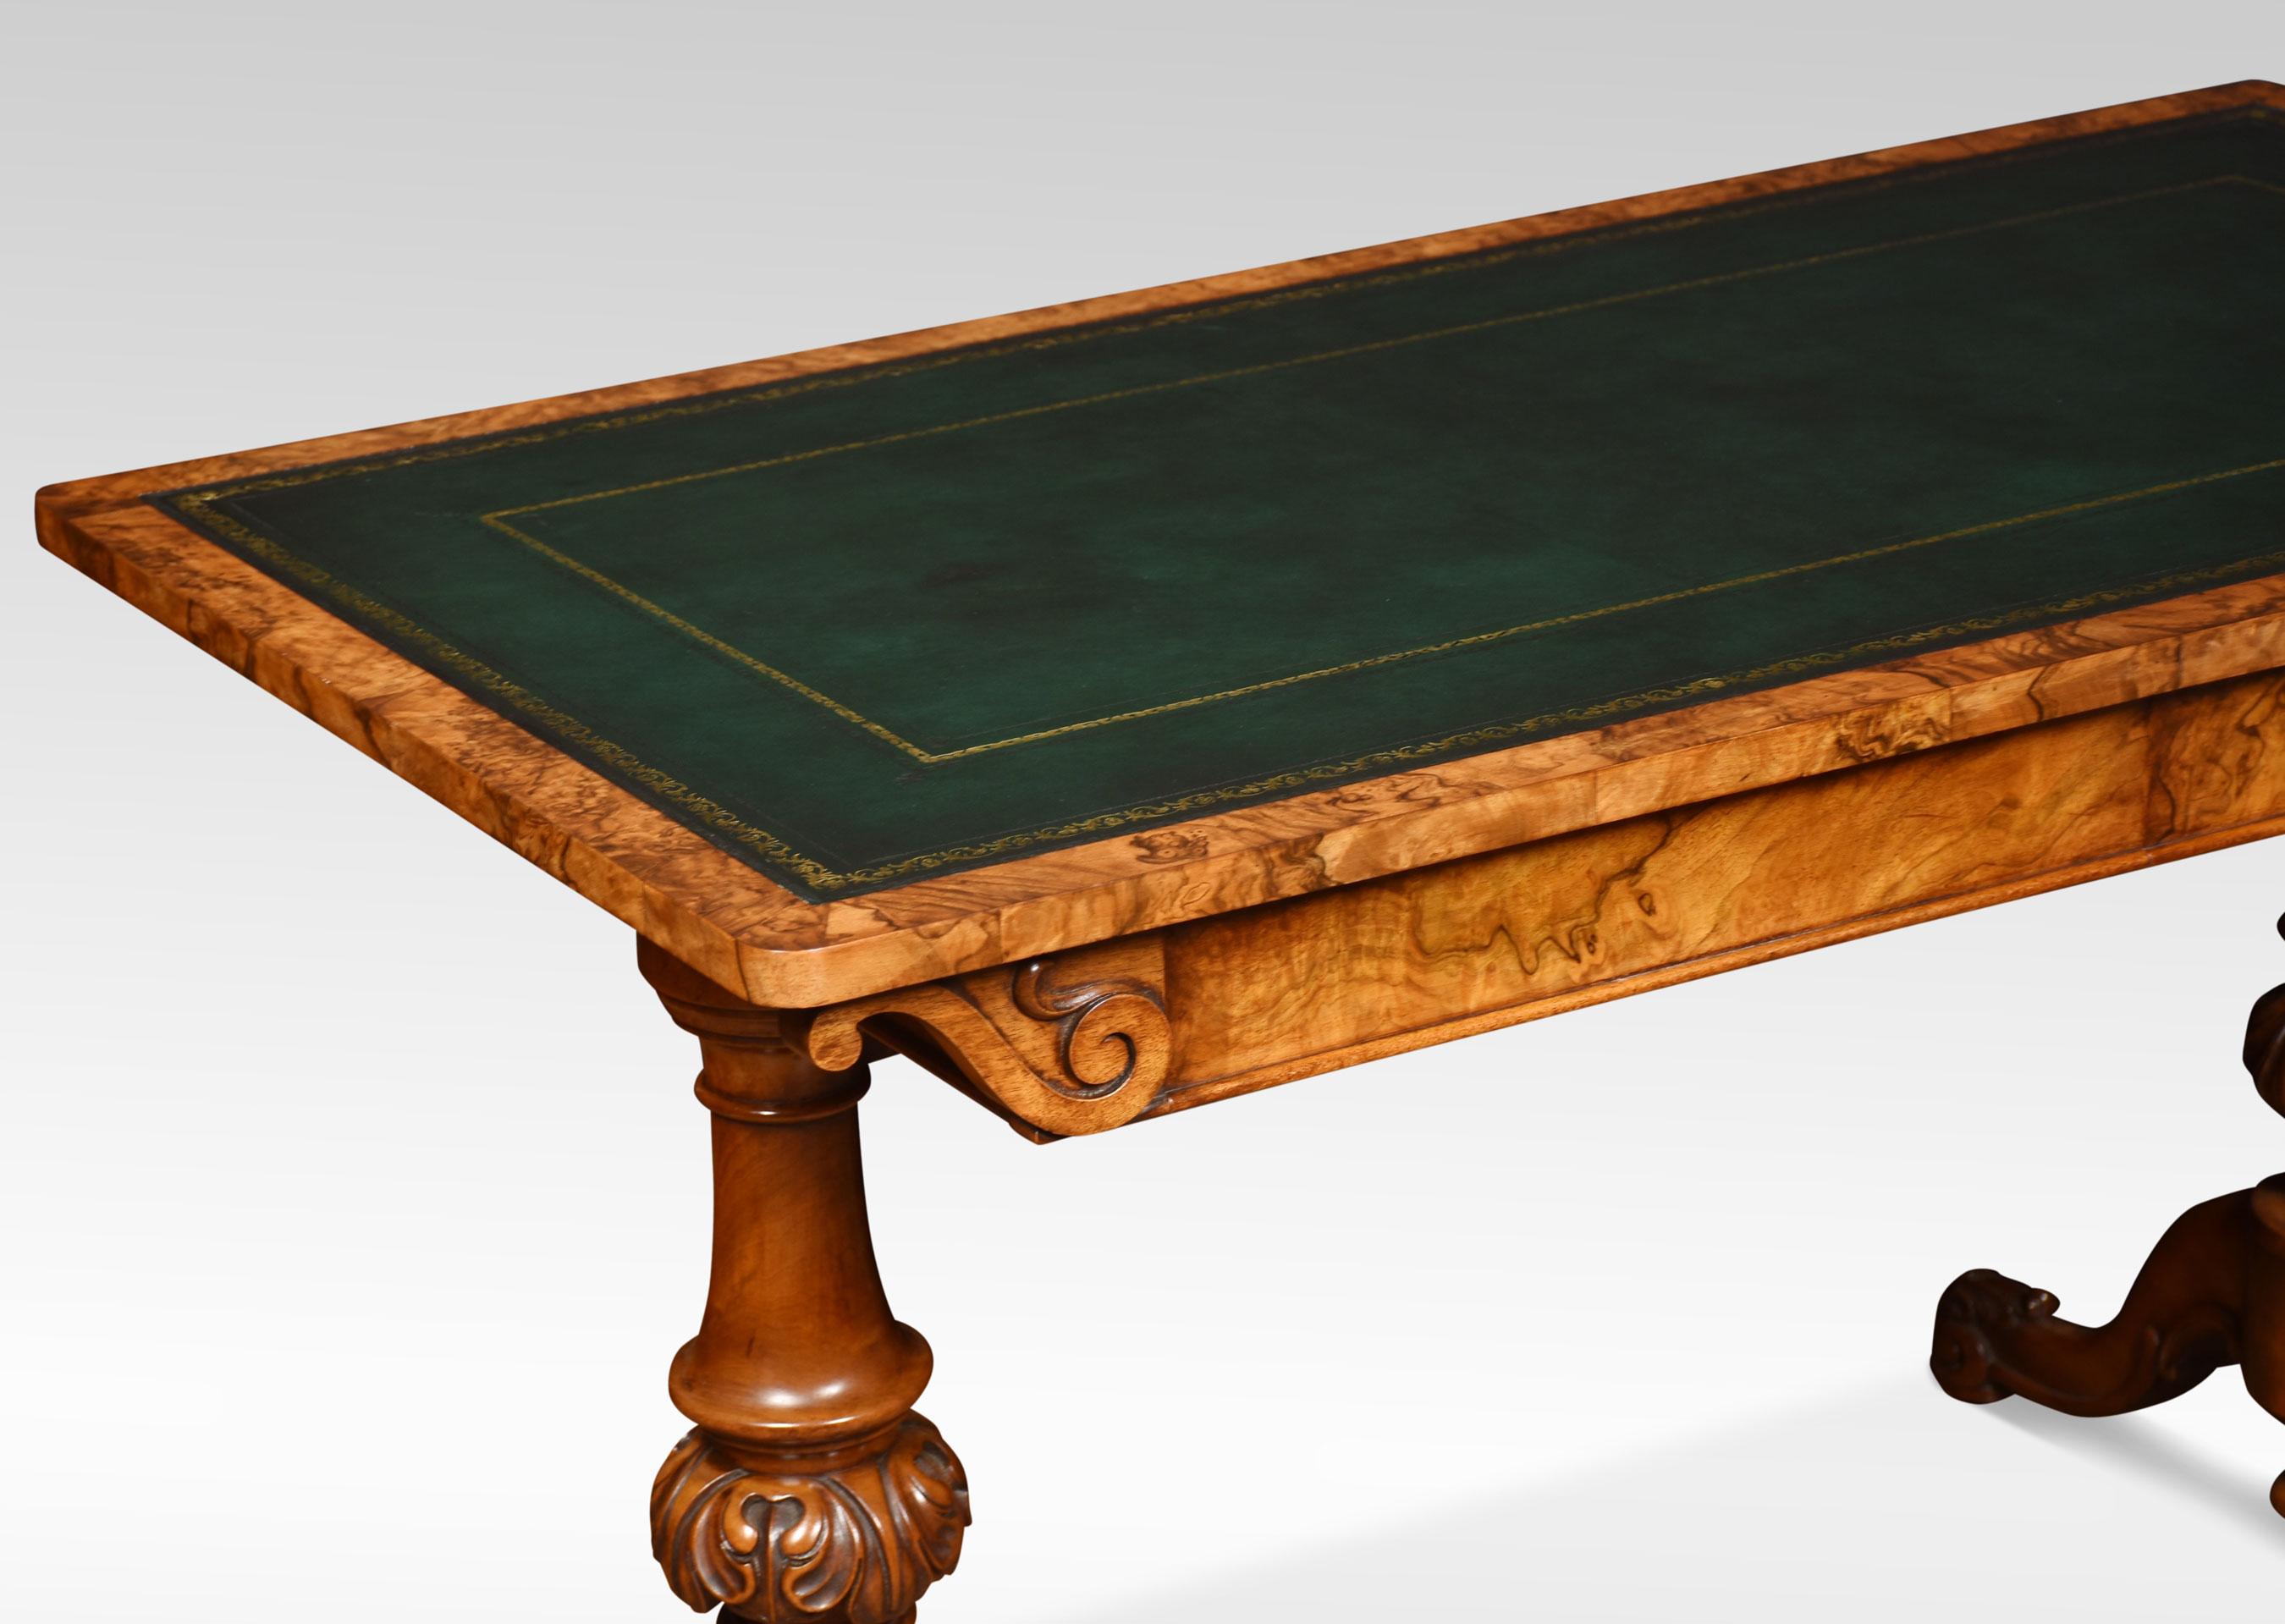 19th century walnut library table, the large rectangular top with rounded corners having tooled inset leather writing surface. The frieze is fitted with two freeze drawers supported on twin carved uprights. All raised up on cabriole legs terminating